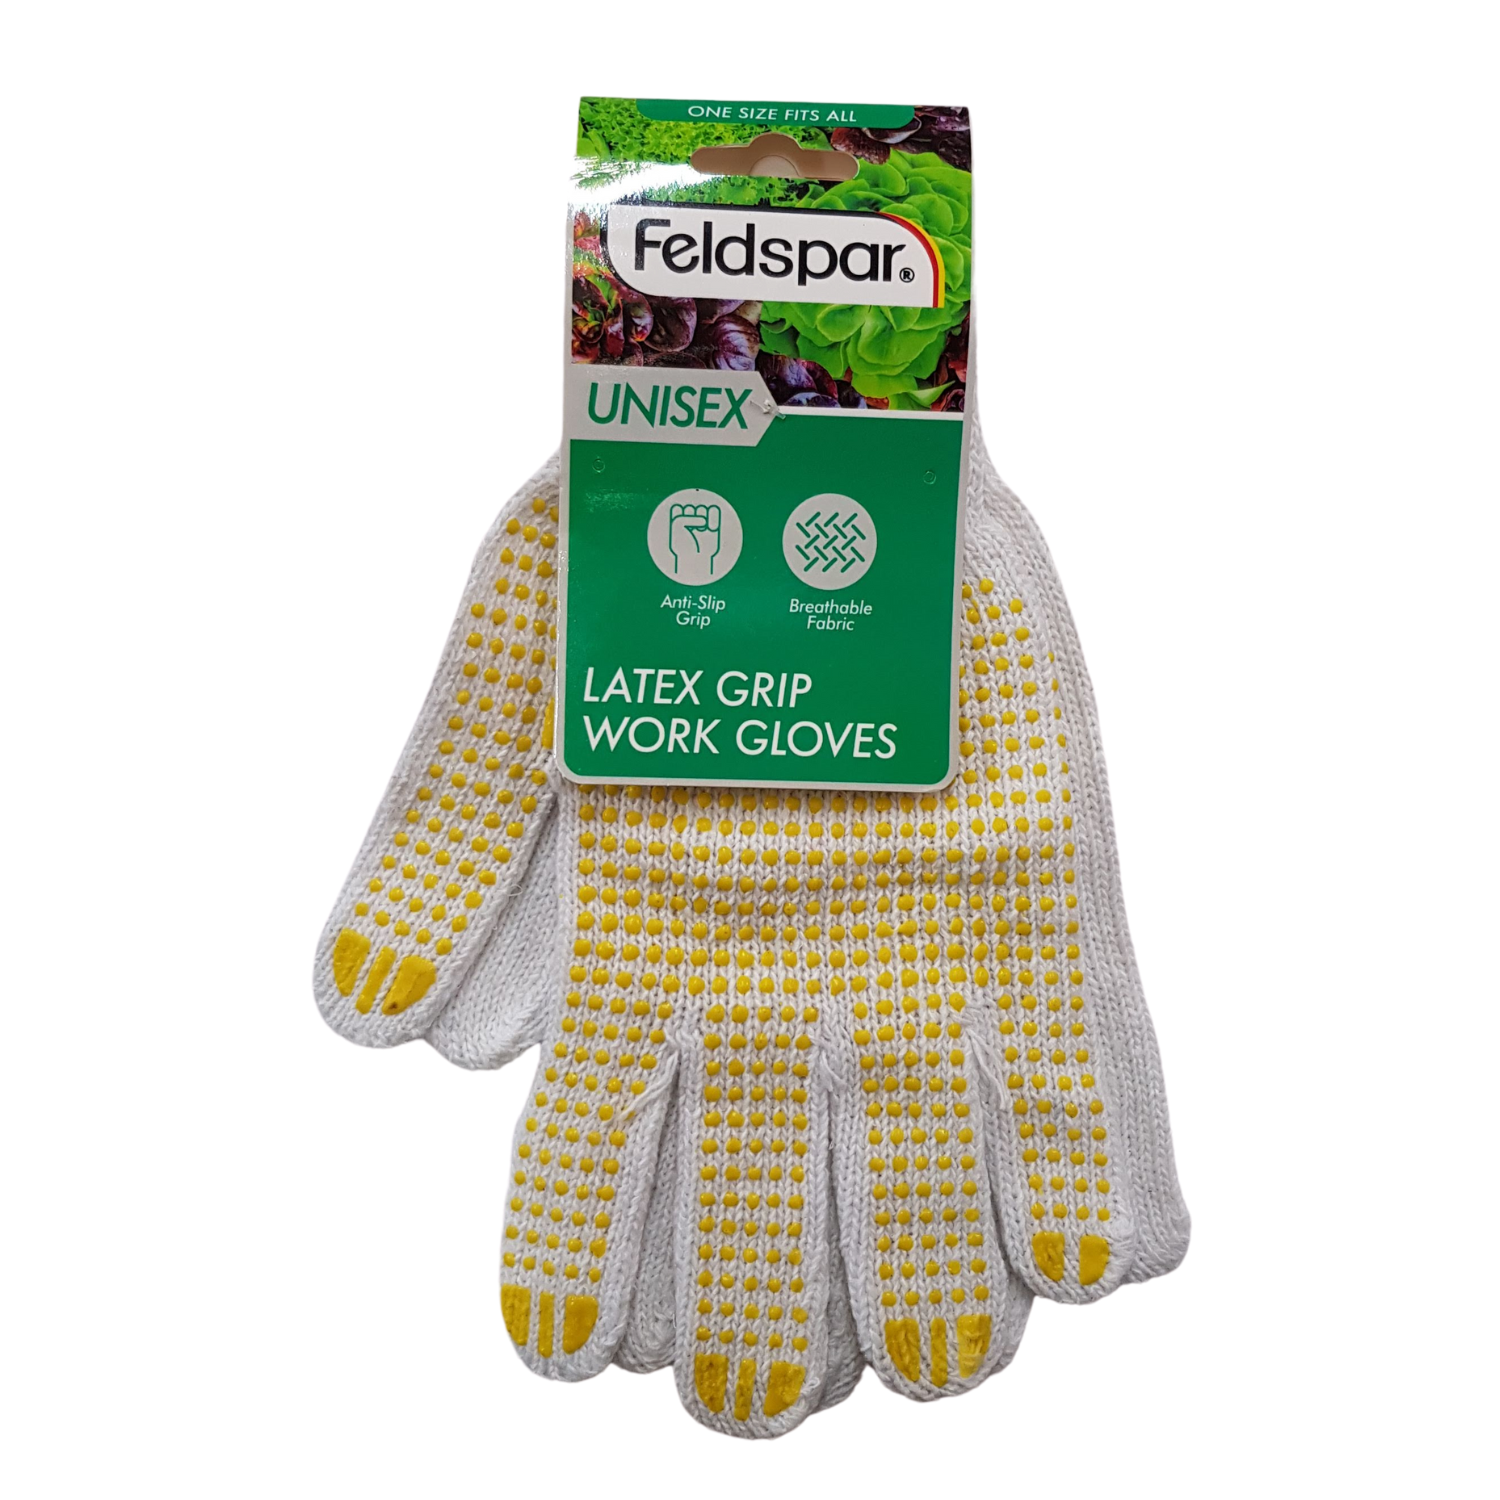 1 Pair of Working Gardening Gloves with Latex Grip